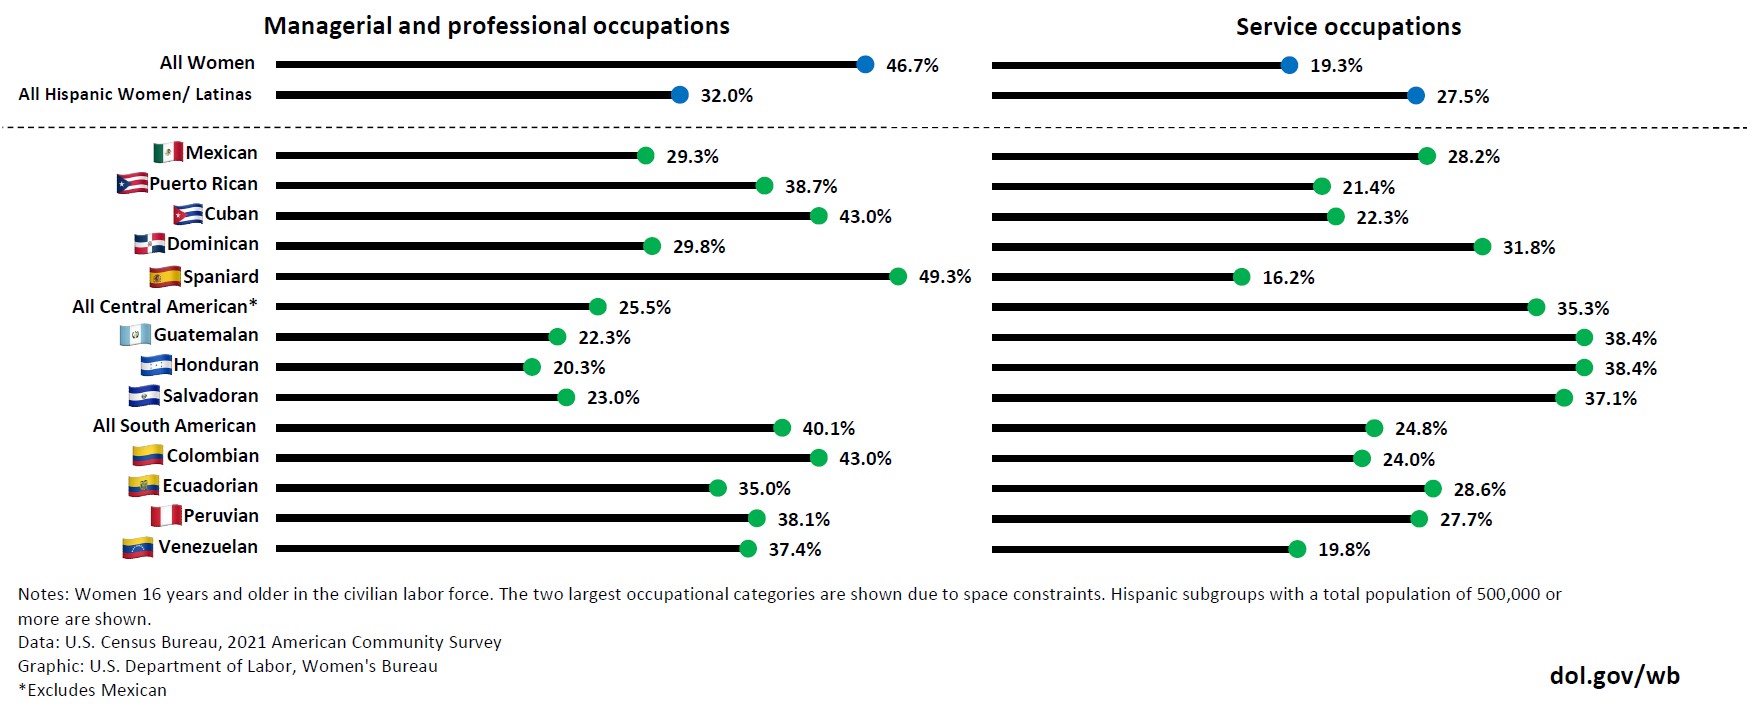 Managerial and professional and service occupations for women (16+) in the civilian labor force among Hispanic subpopulations. The two largest occupational categories are shown due to space constraints. Only subpopulations with a total population of 500,000 or more are shown. This data is from the 2021 U.S. Census Bureau American Community Survey.